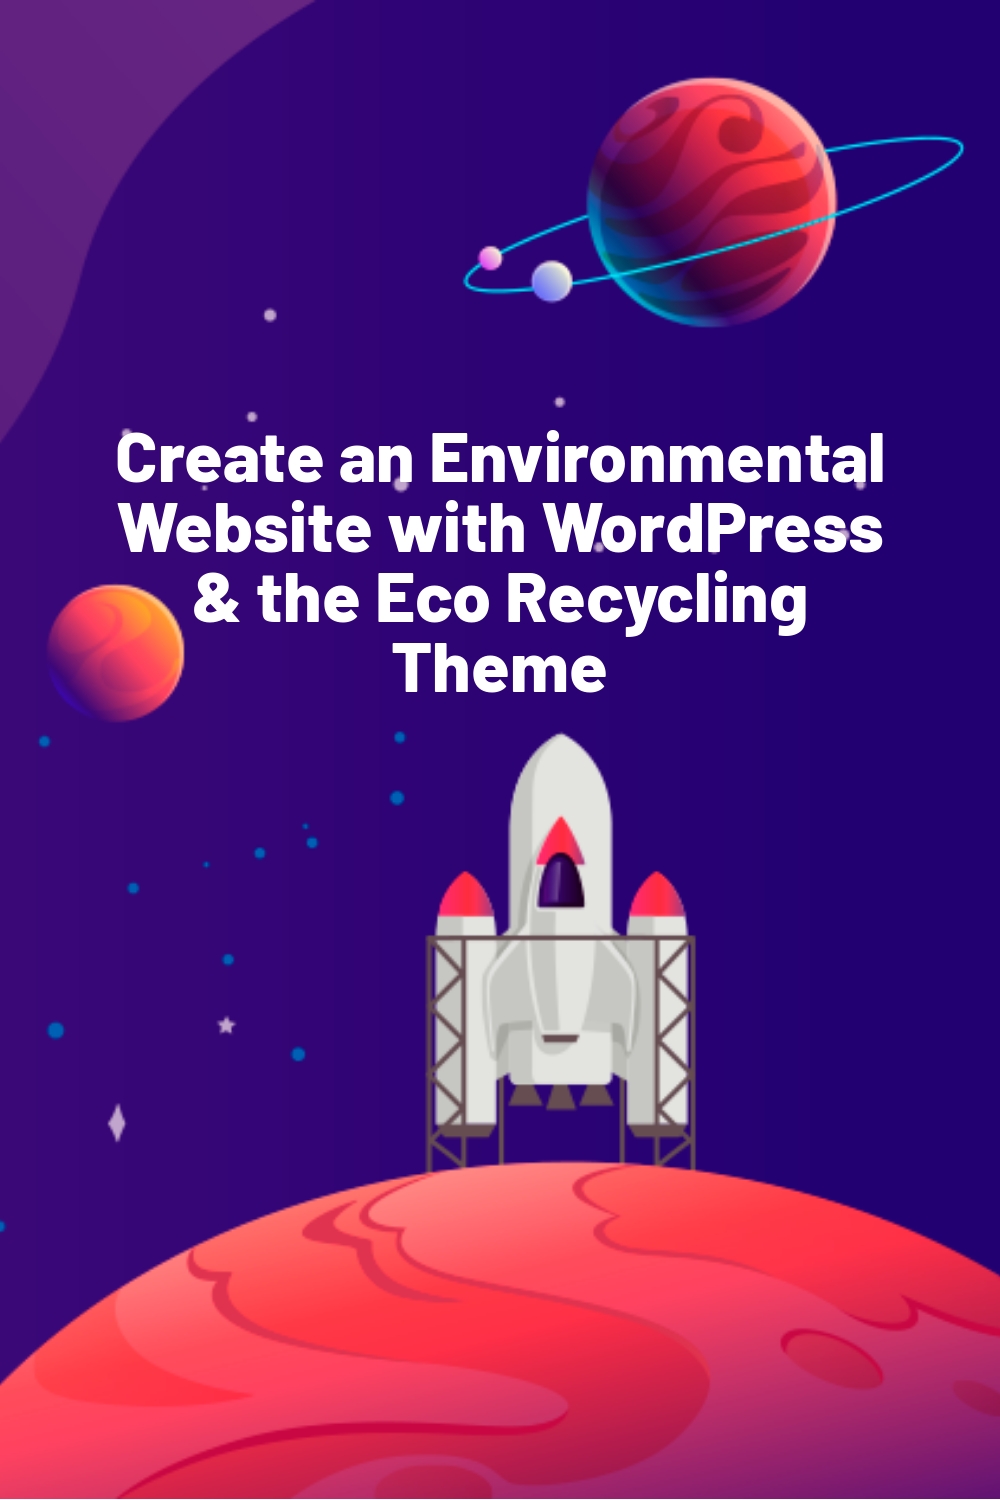 Create an Environmental Website with WordPress & the Eco Recycling Theme